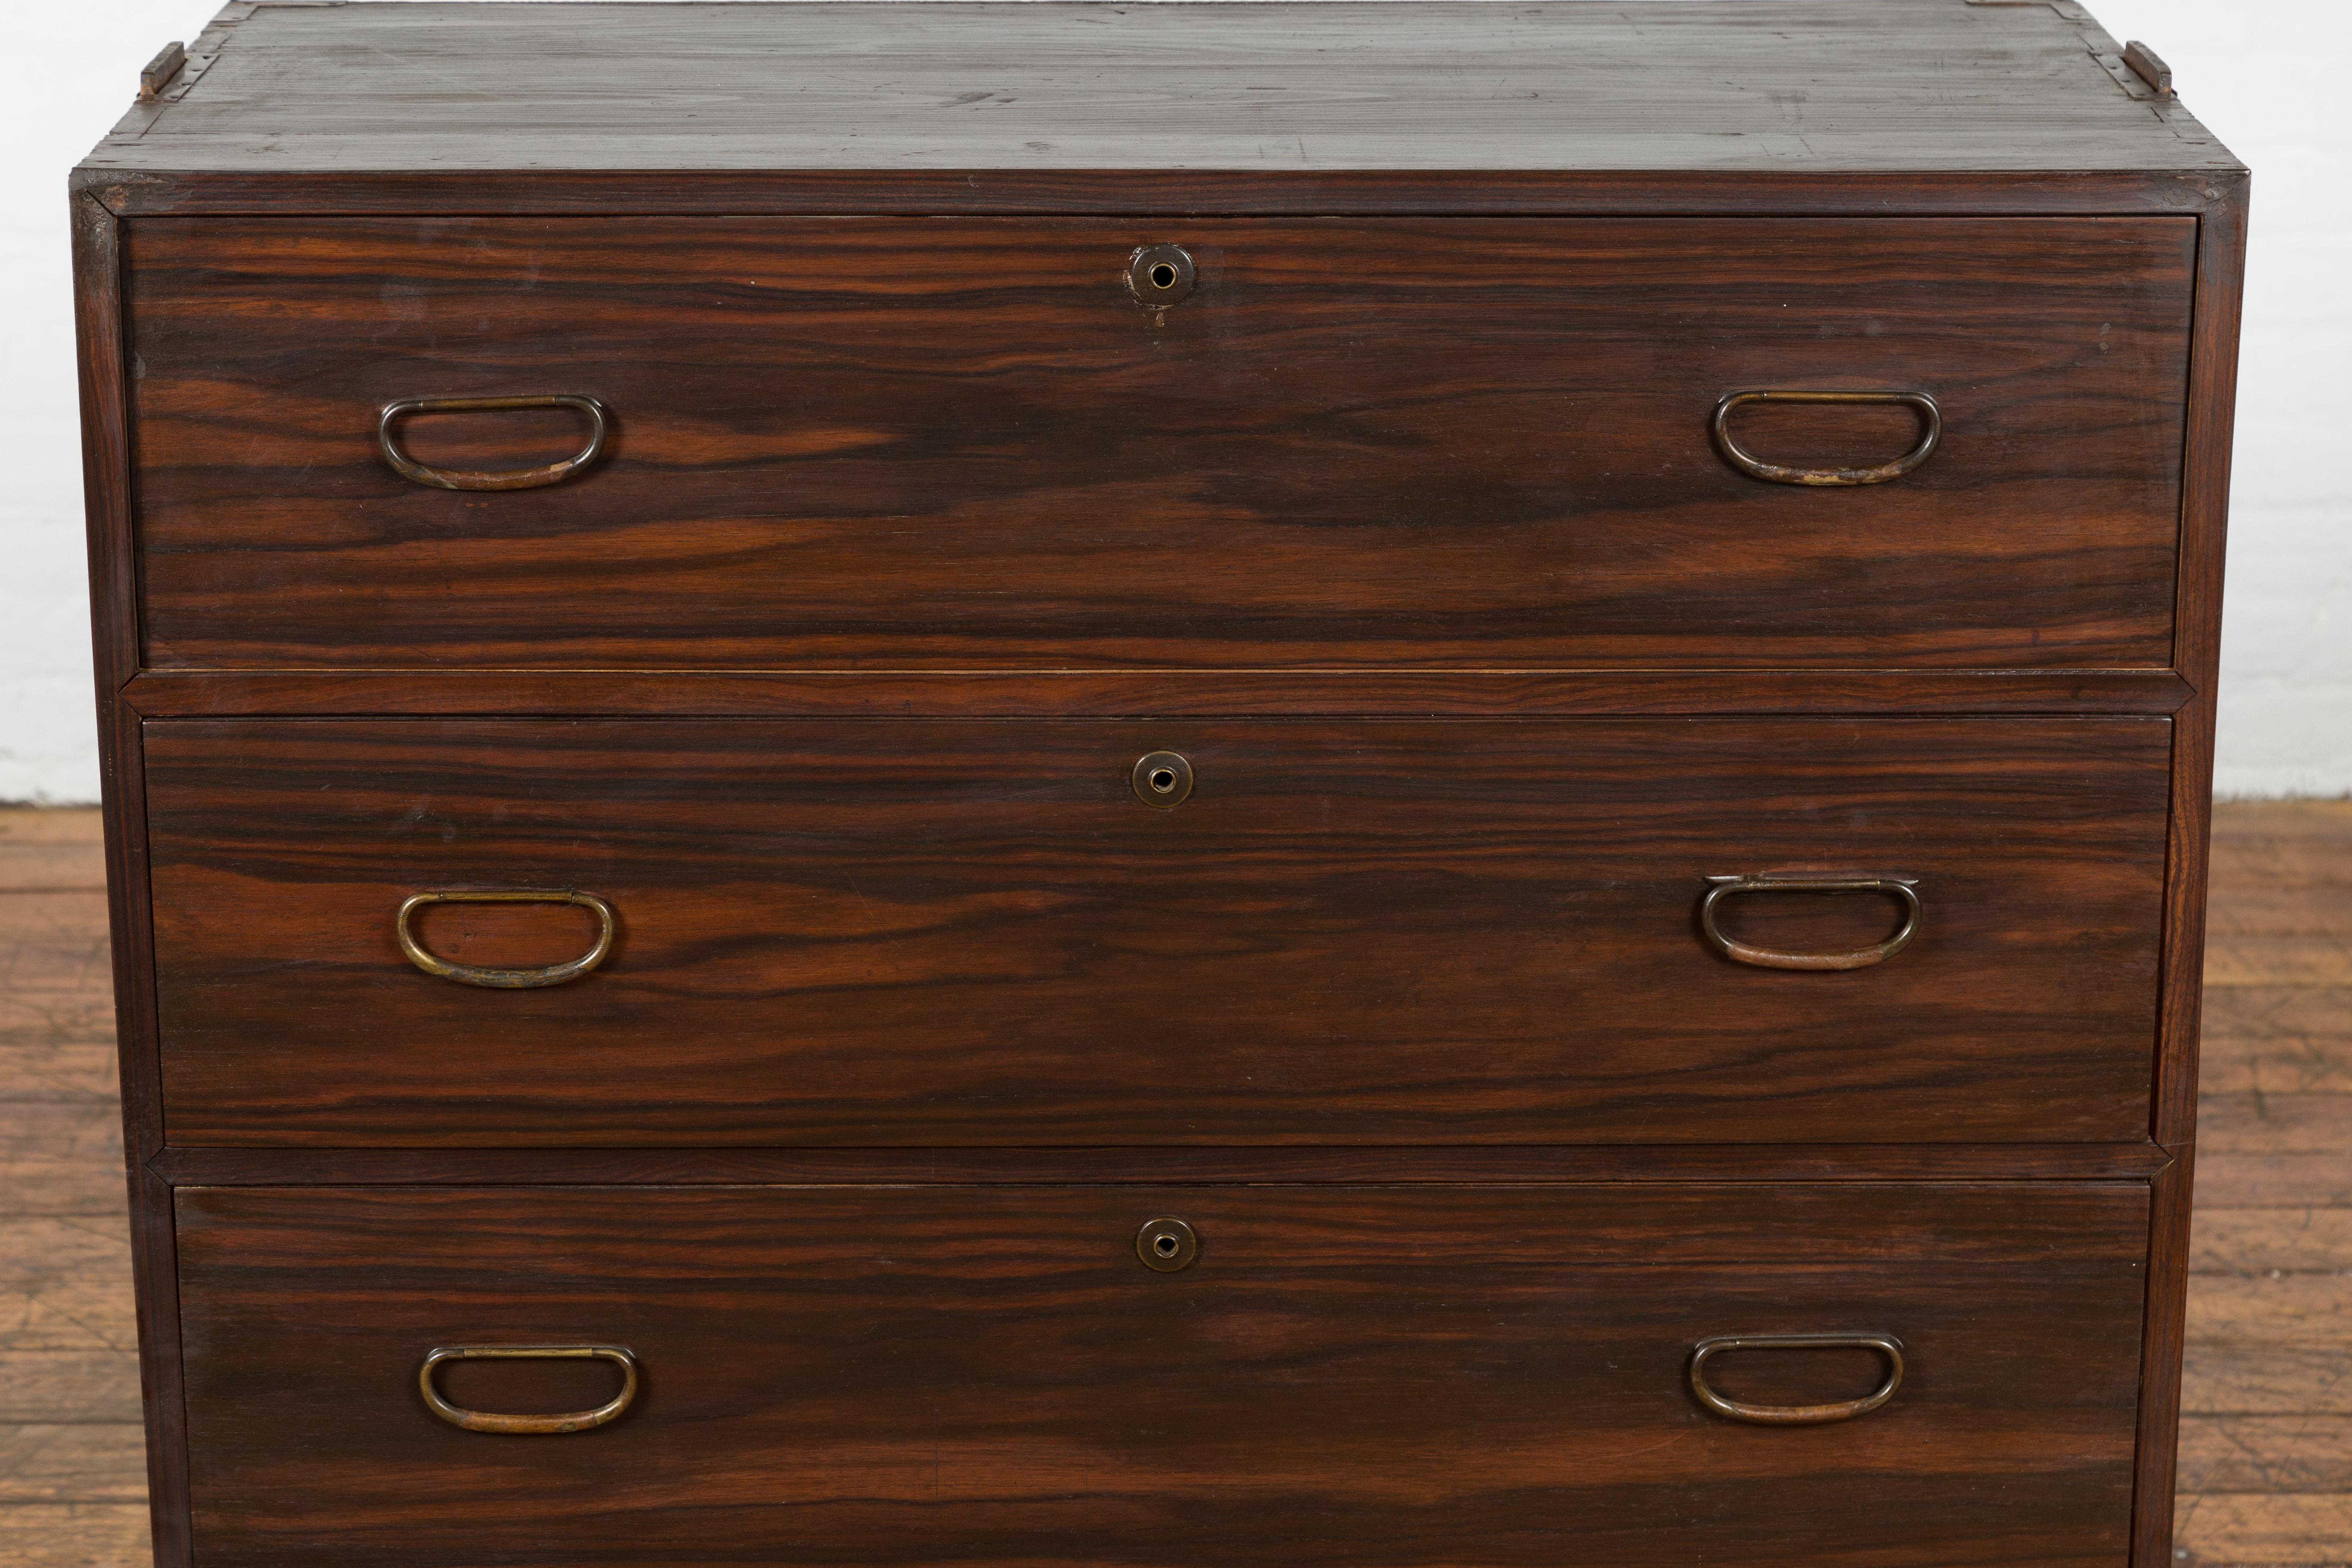 Dark Brown Antique Wooden Tansu Dresser Chest In Good Condition For Sale In Yonkers, NY